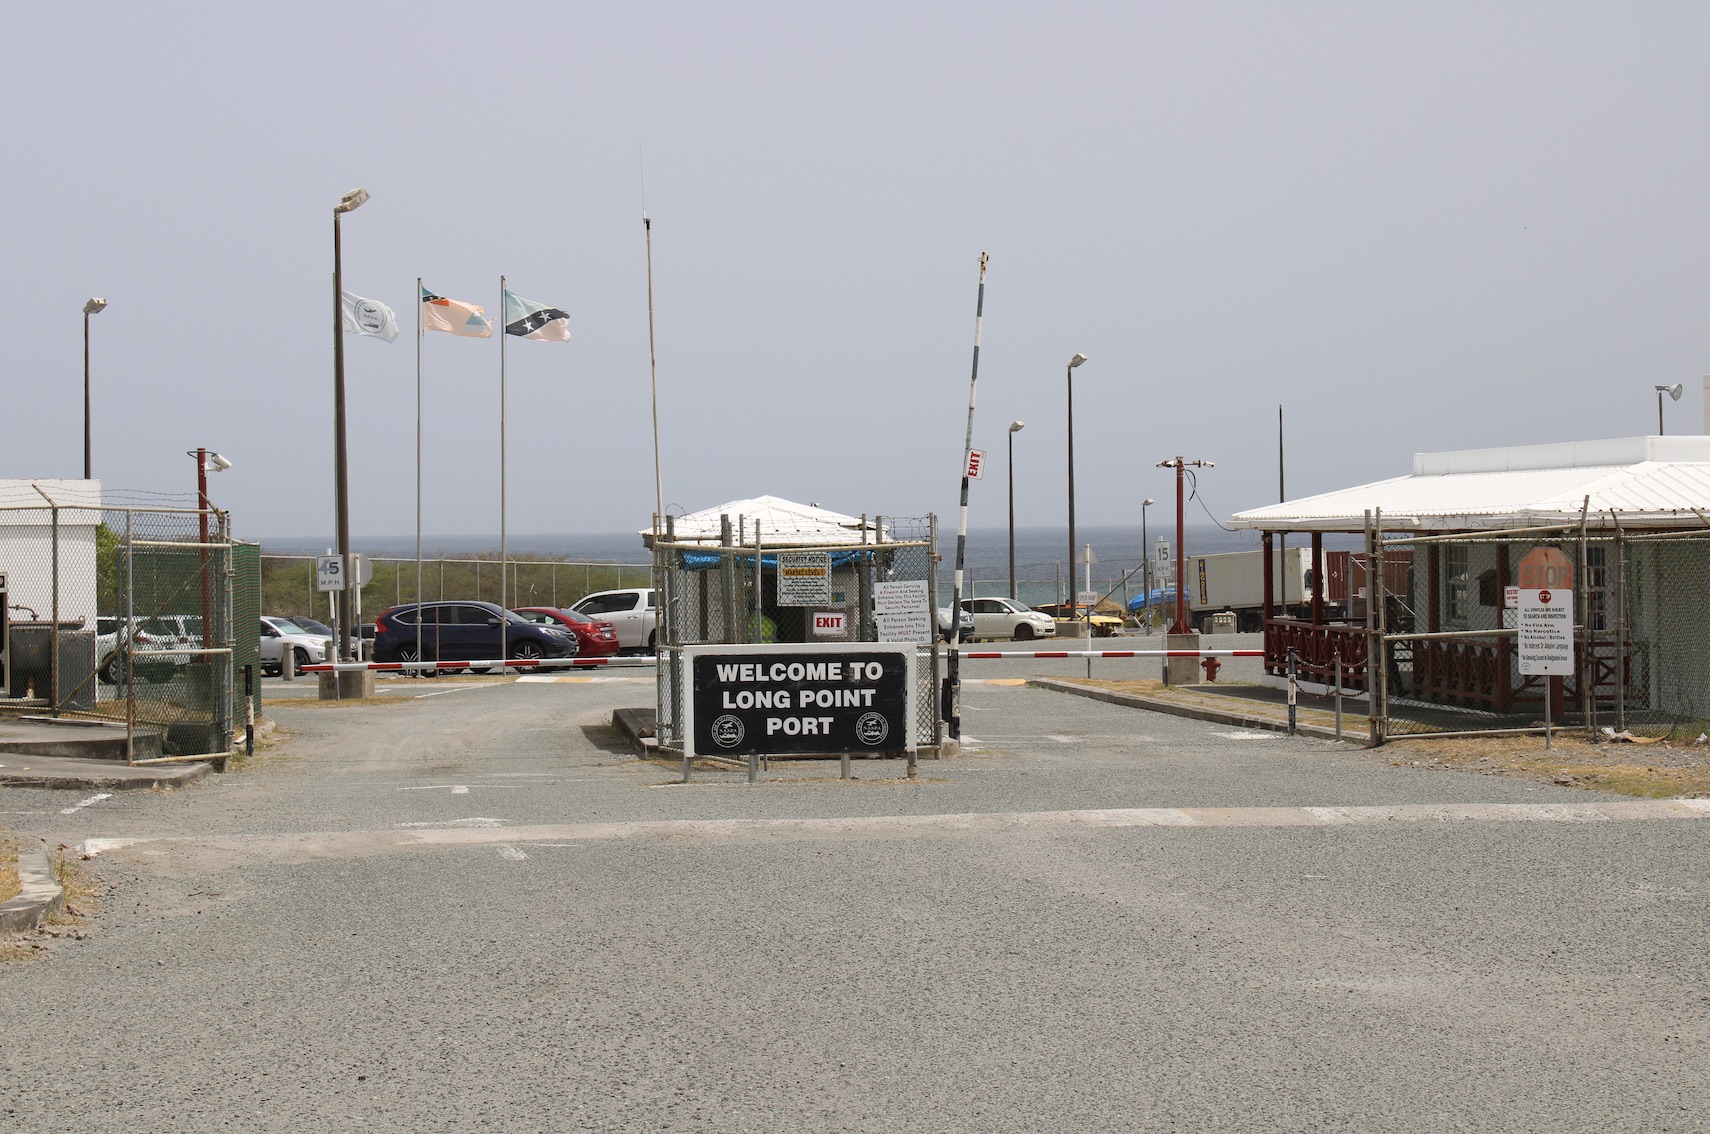 Entrance of the Long Point Port